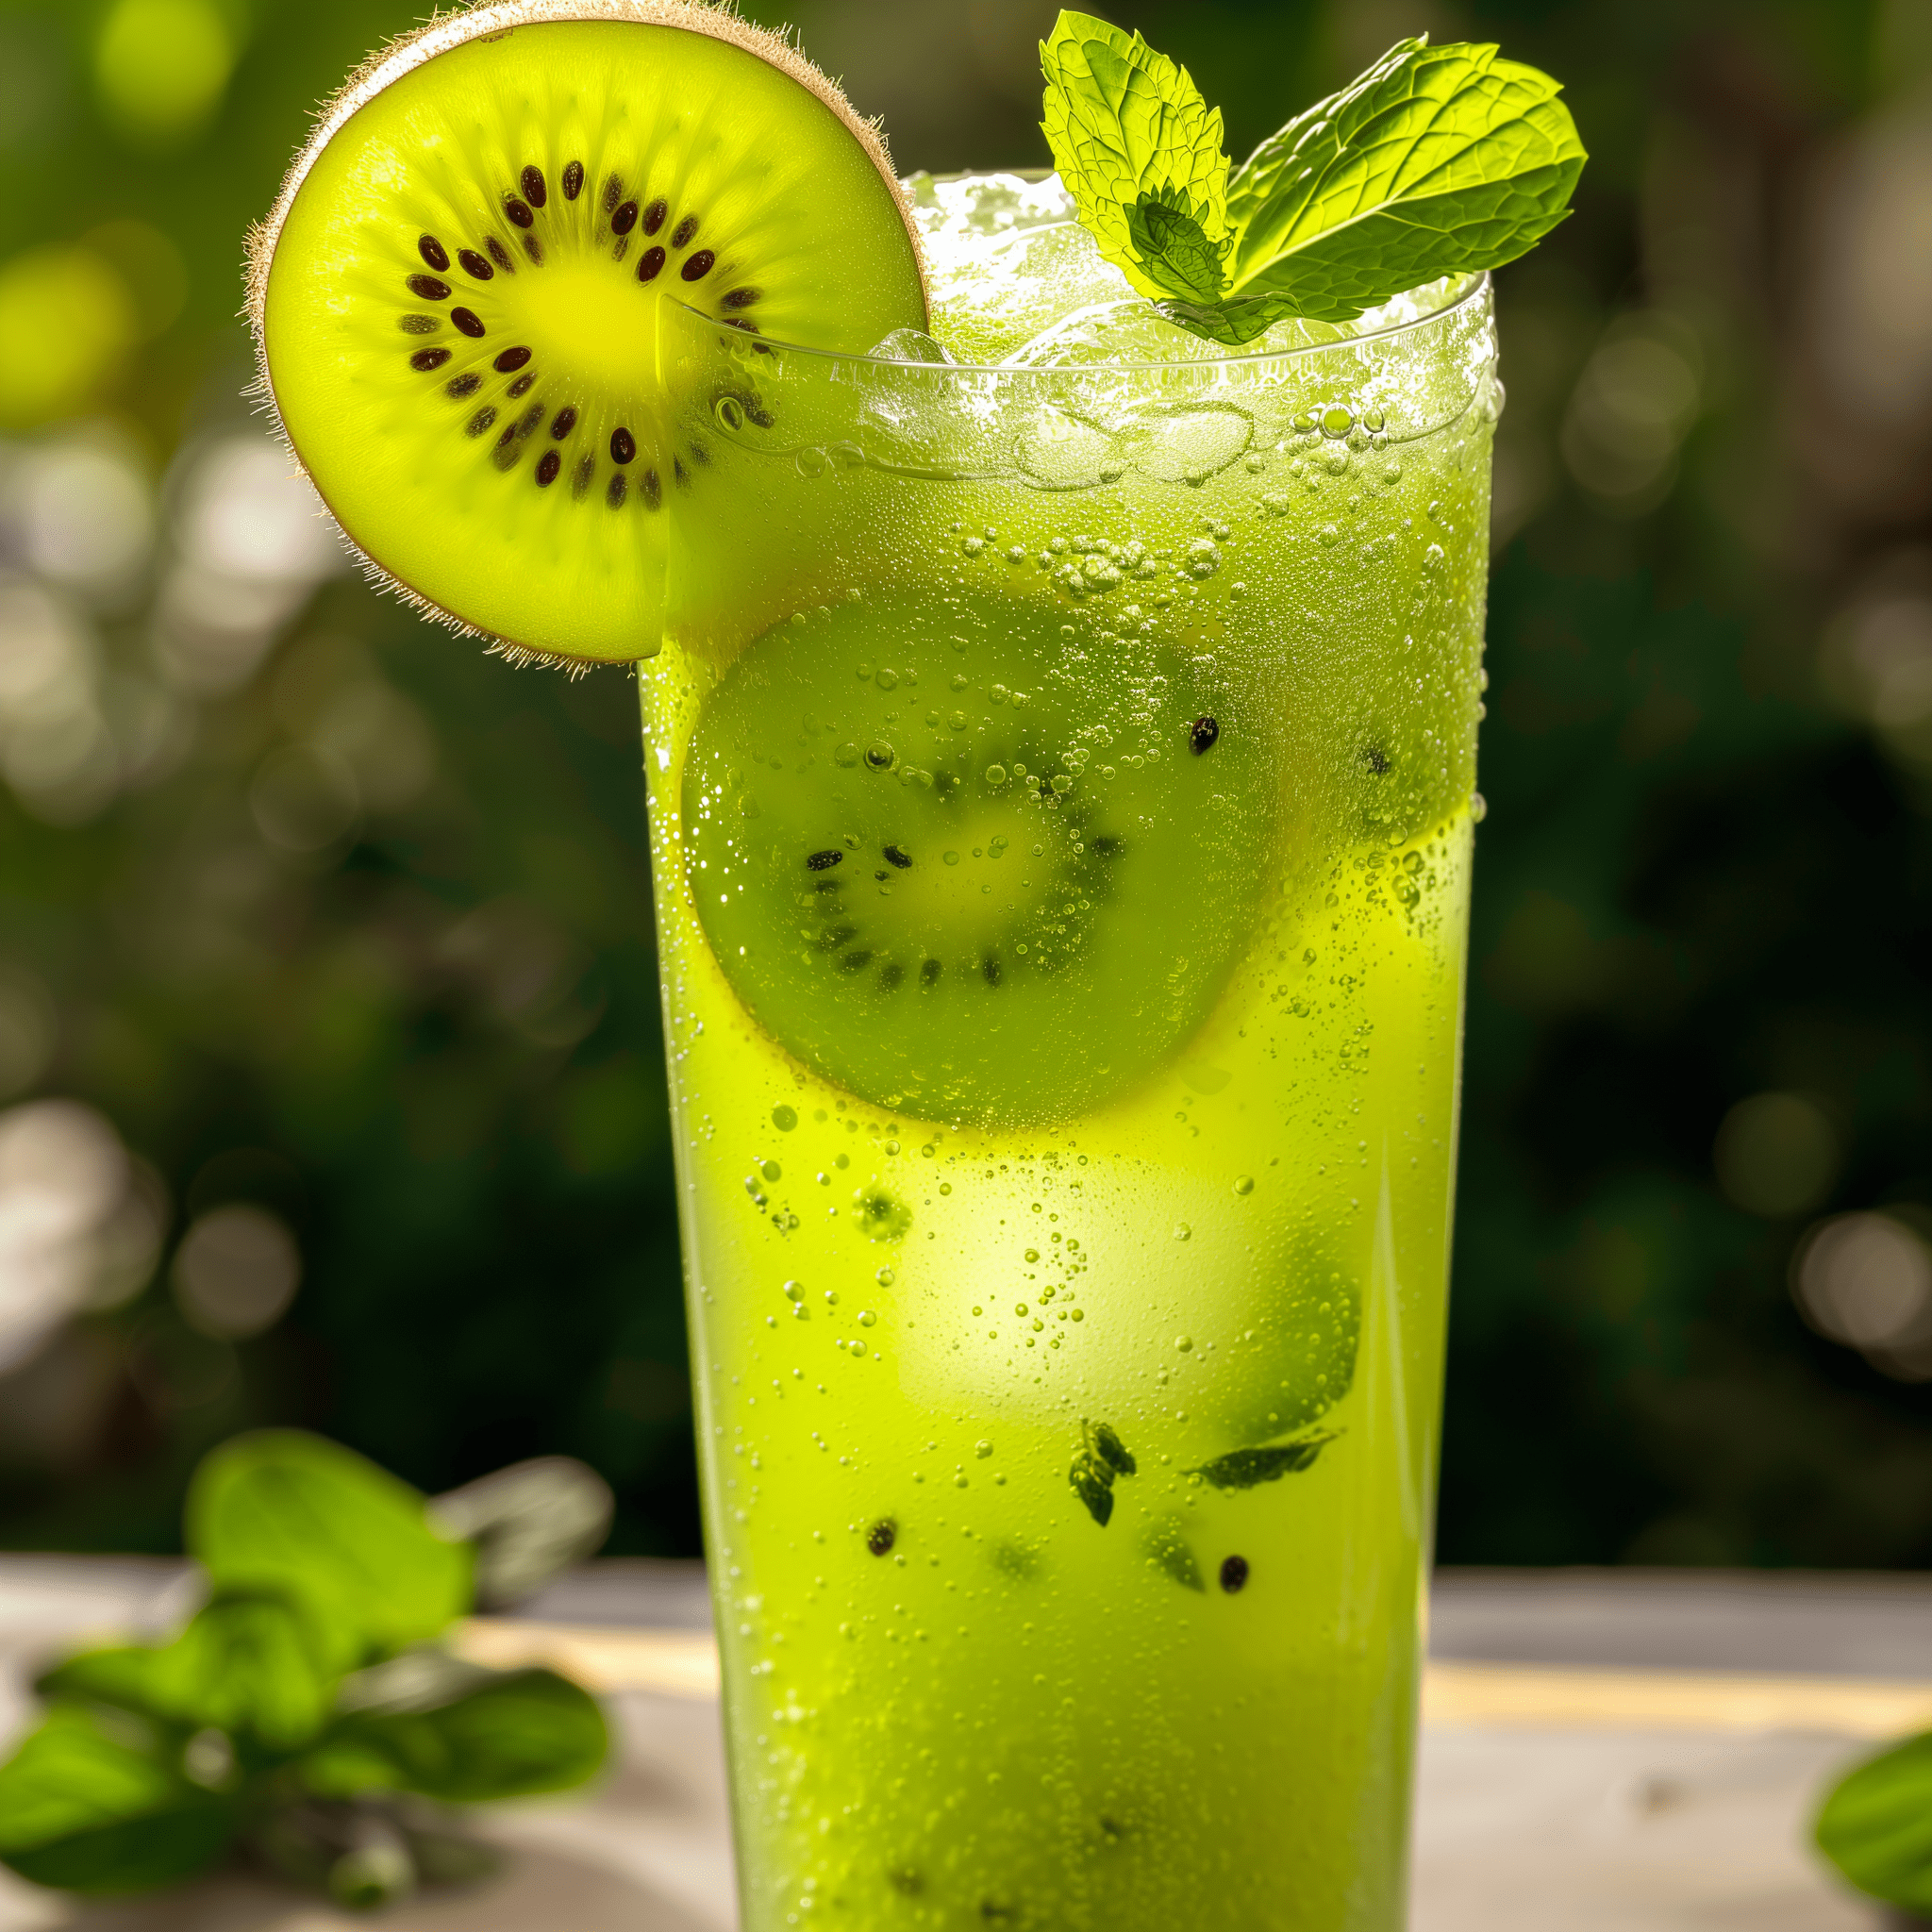 Kiwi Cooler Mocktail Recipe - The Kiwi Cooler Mocktail offers a harmonious blend of sweet and tart flavors. The kiwi provides a juicy, tropical essence, while the lime juice adds a zesty kick. The mint leaves infuse a subtle freshness that balances the drink, and the sparkling water or kombucha introduces a fizzy element that makes it incredibly refreshing.